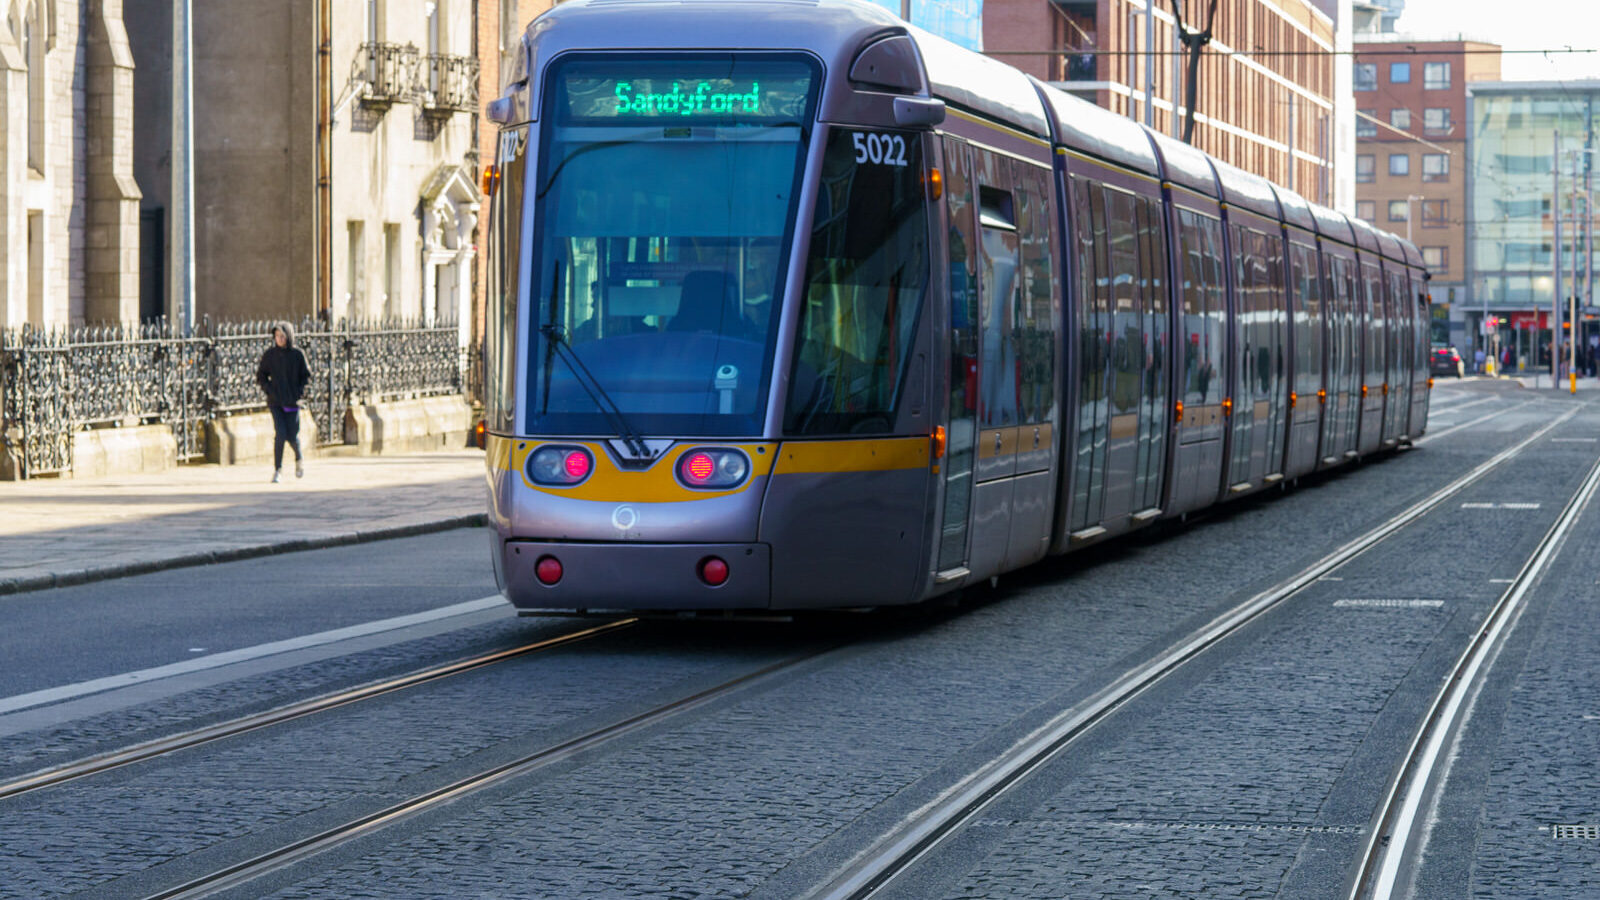 LUAS TRAM STOP AT LOWER DOMINICK STREET [AT THE MOMENT THE AREA DOES FEEL SAFER]-228674-1